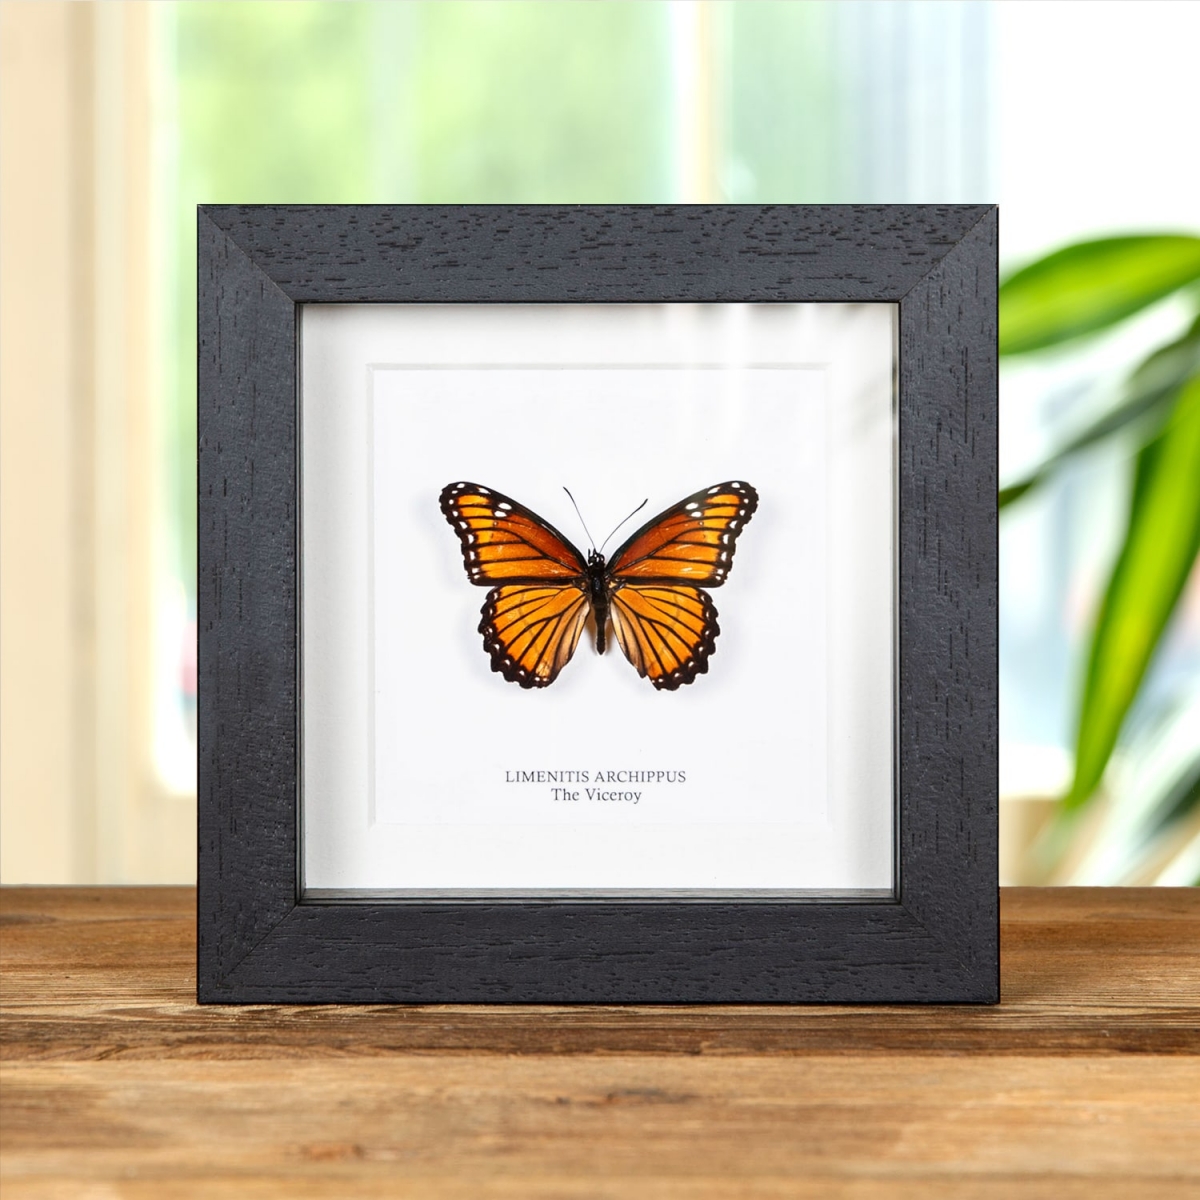 Minibeast The Viceroy in Box Frame (Limenitis archippus)